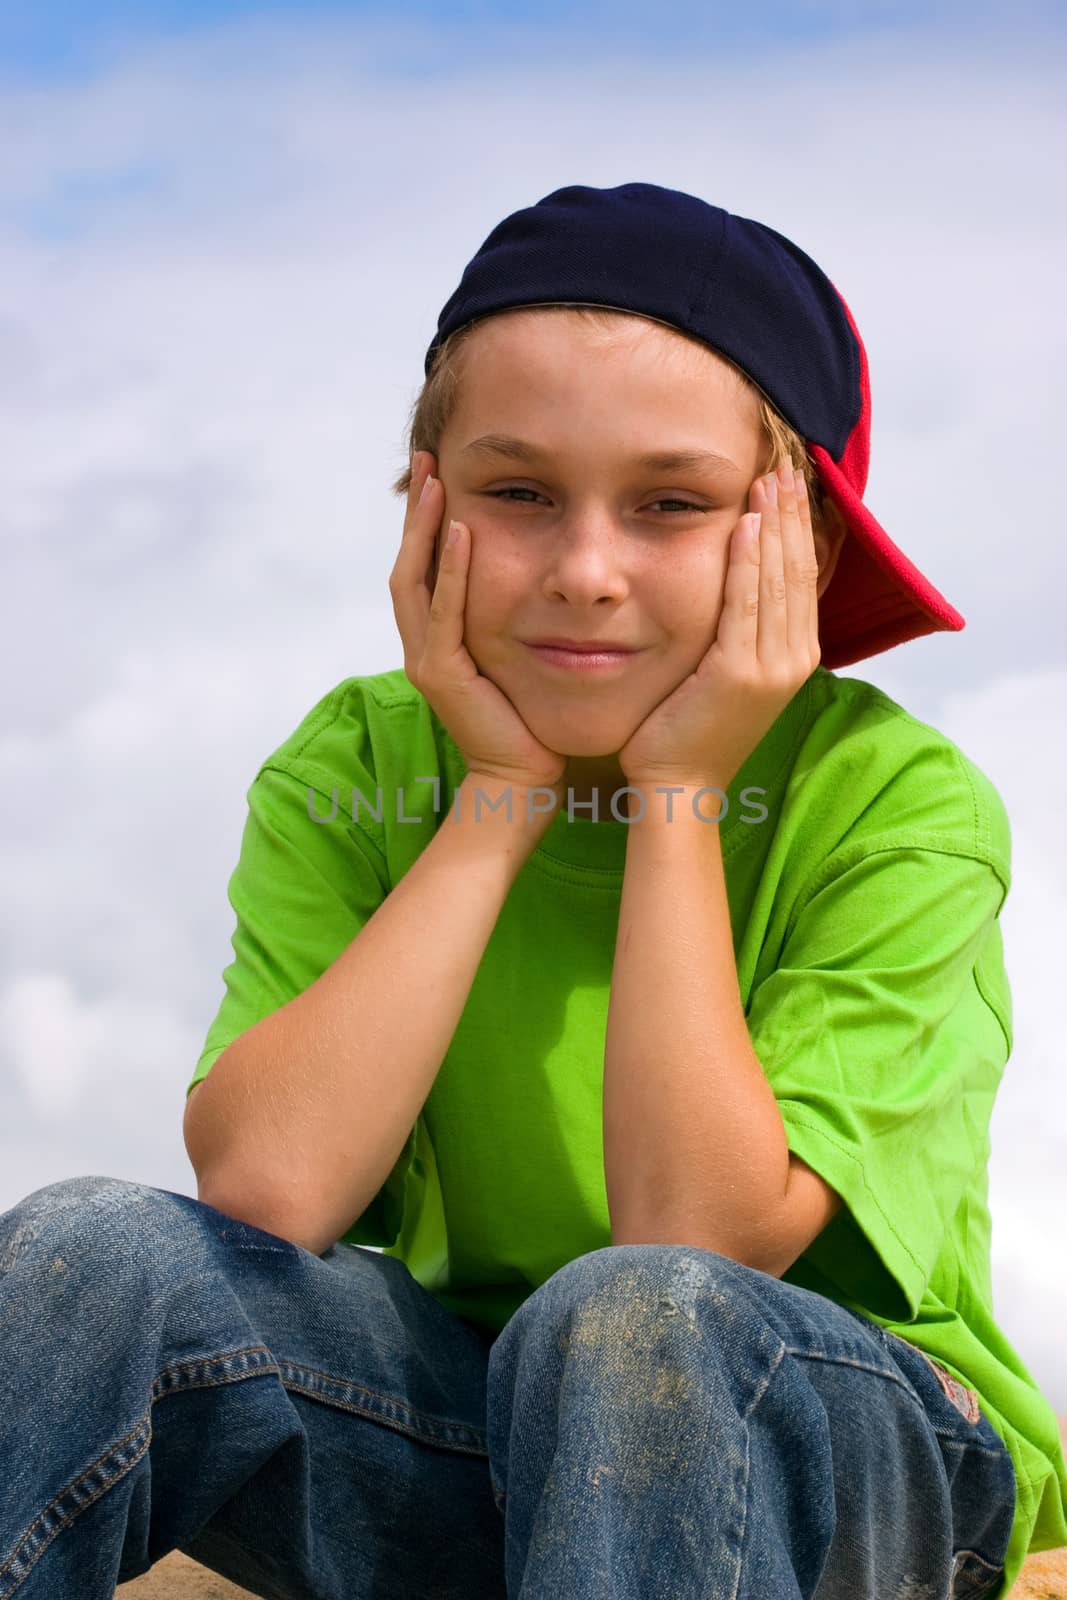 Smiling boy head in hands wearing jeans, t-shirt and baseball cap sitting outside.